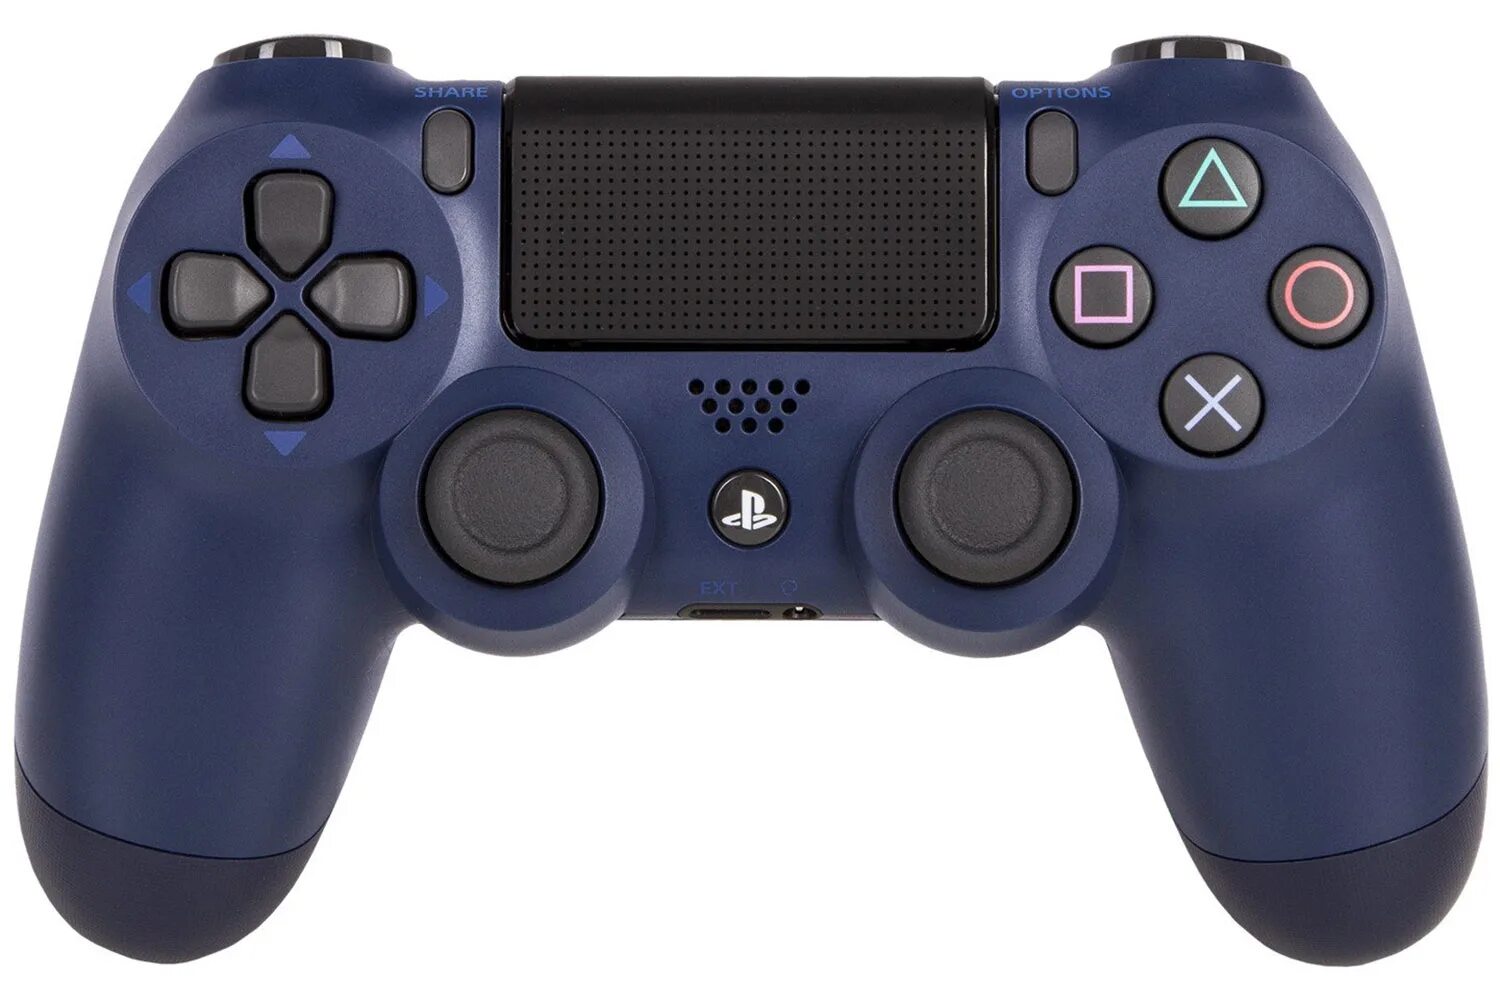 Ps4 джойстик android. Sony PLAYSTATION 4 Dualshock 4. Sony Dualshock 4 Sony. Джойстик Dualshock 4. CUH-zct2e.